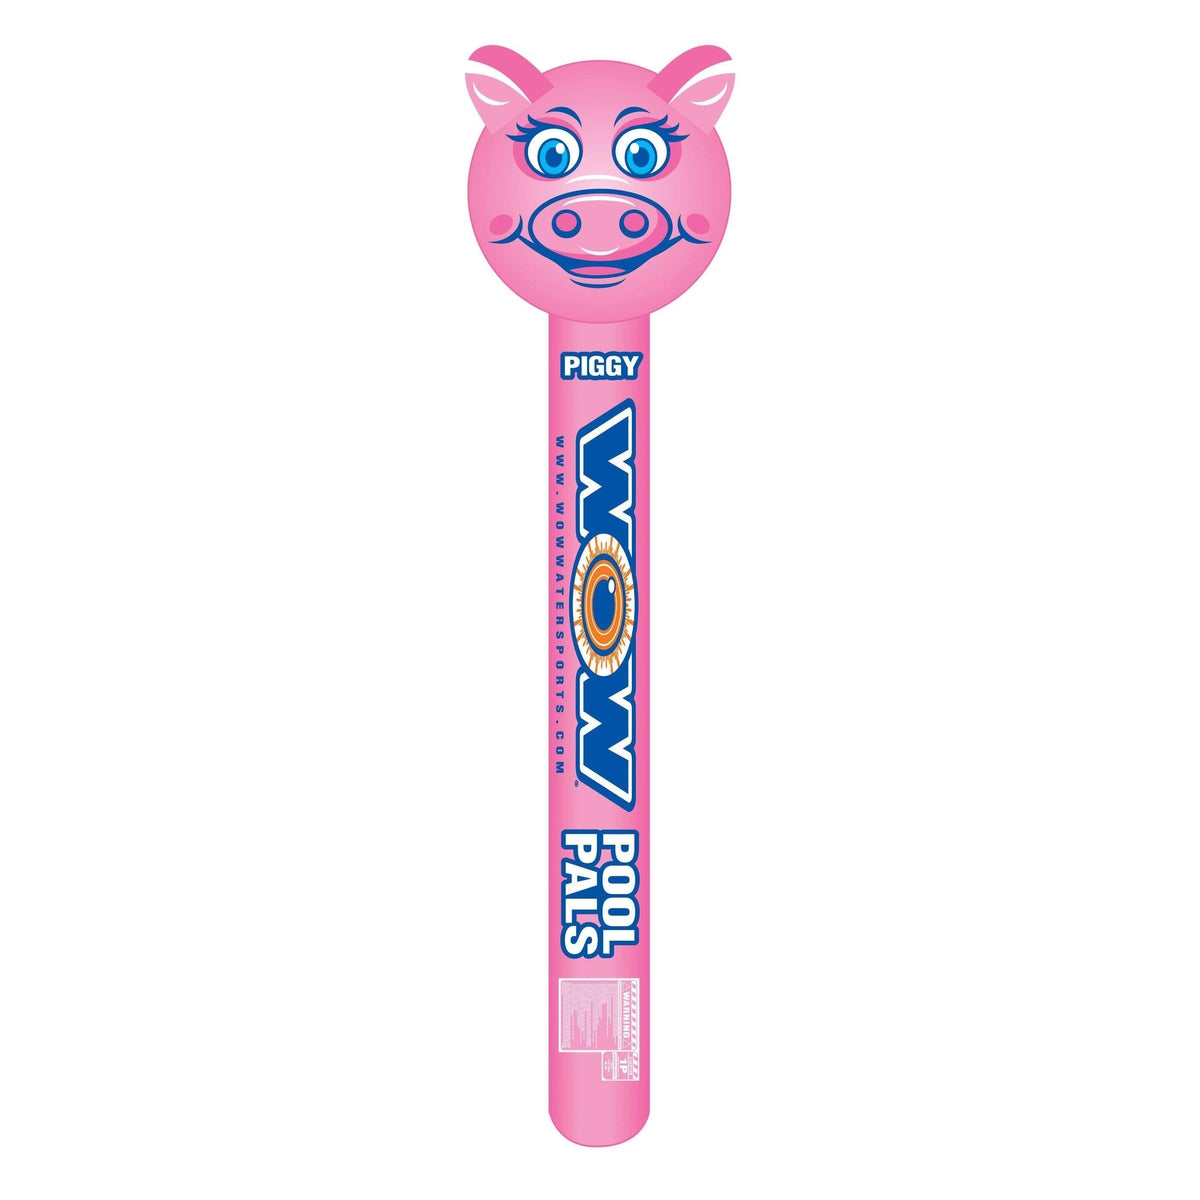 WOW World of Watersports Pool Pals Pig #17-2052